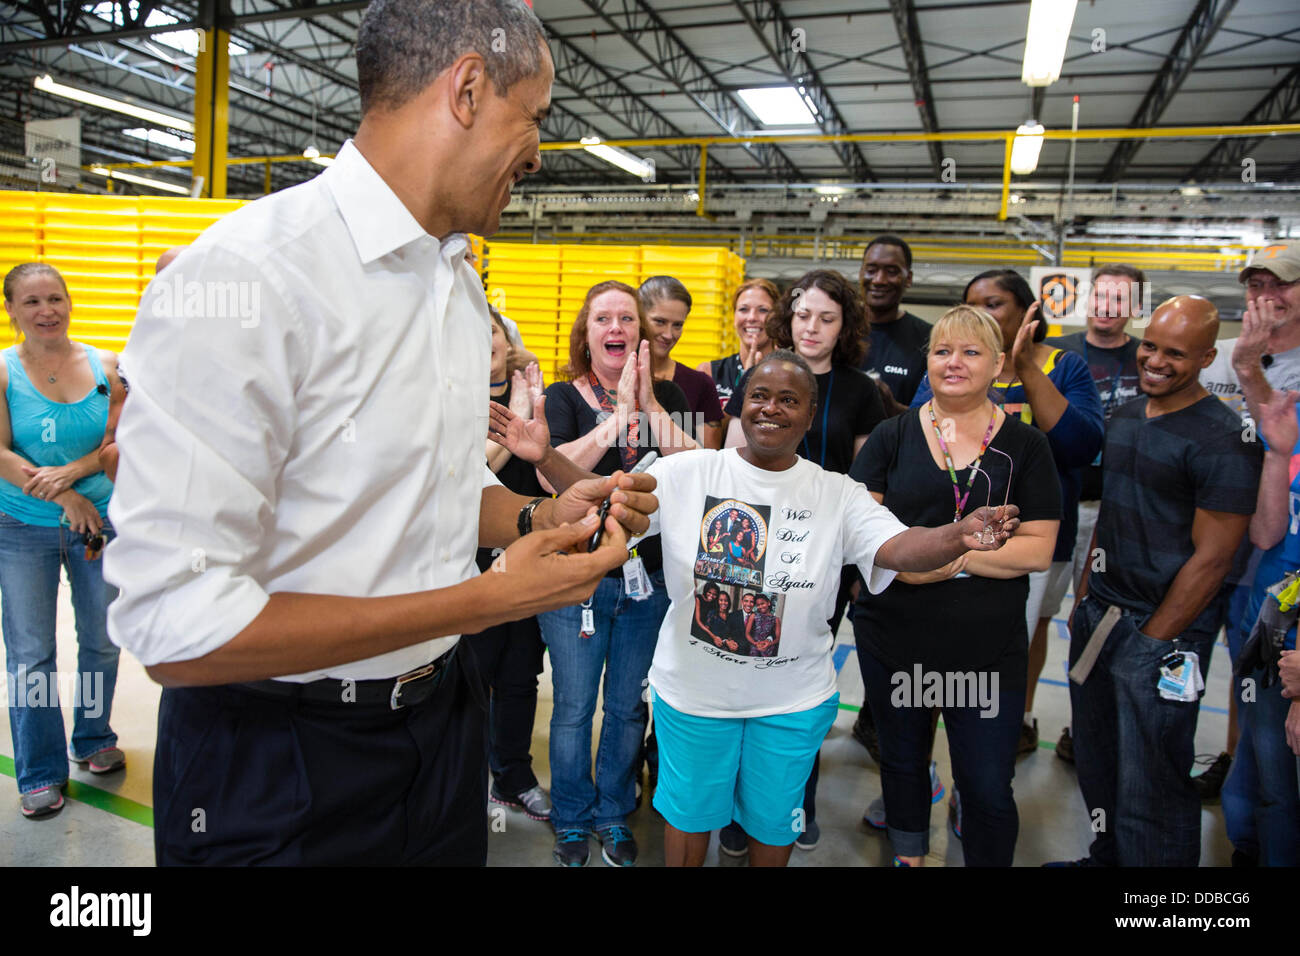 US President Barack Obama greets line workers at the Amazon fulfillment center July 30, 2013 in Chattanooga, Tennessee. Stock Photo